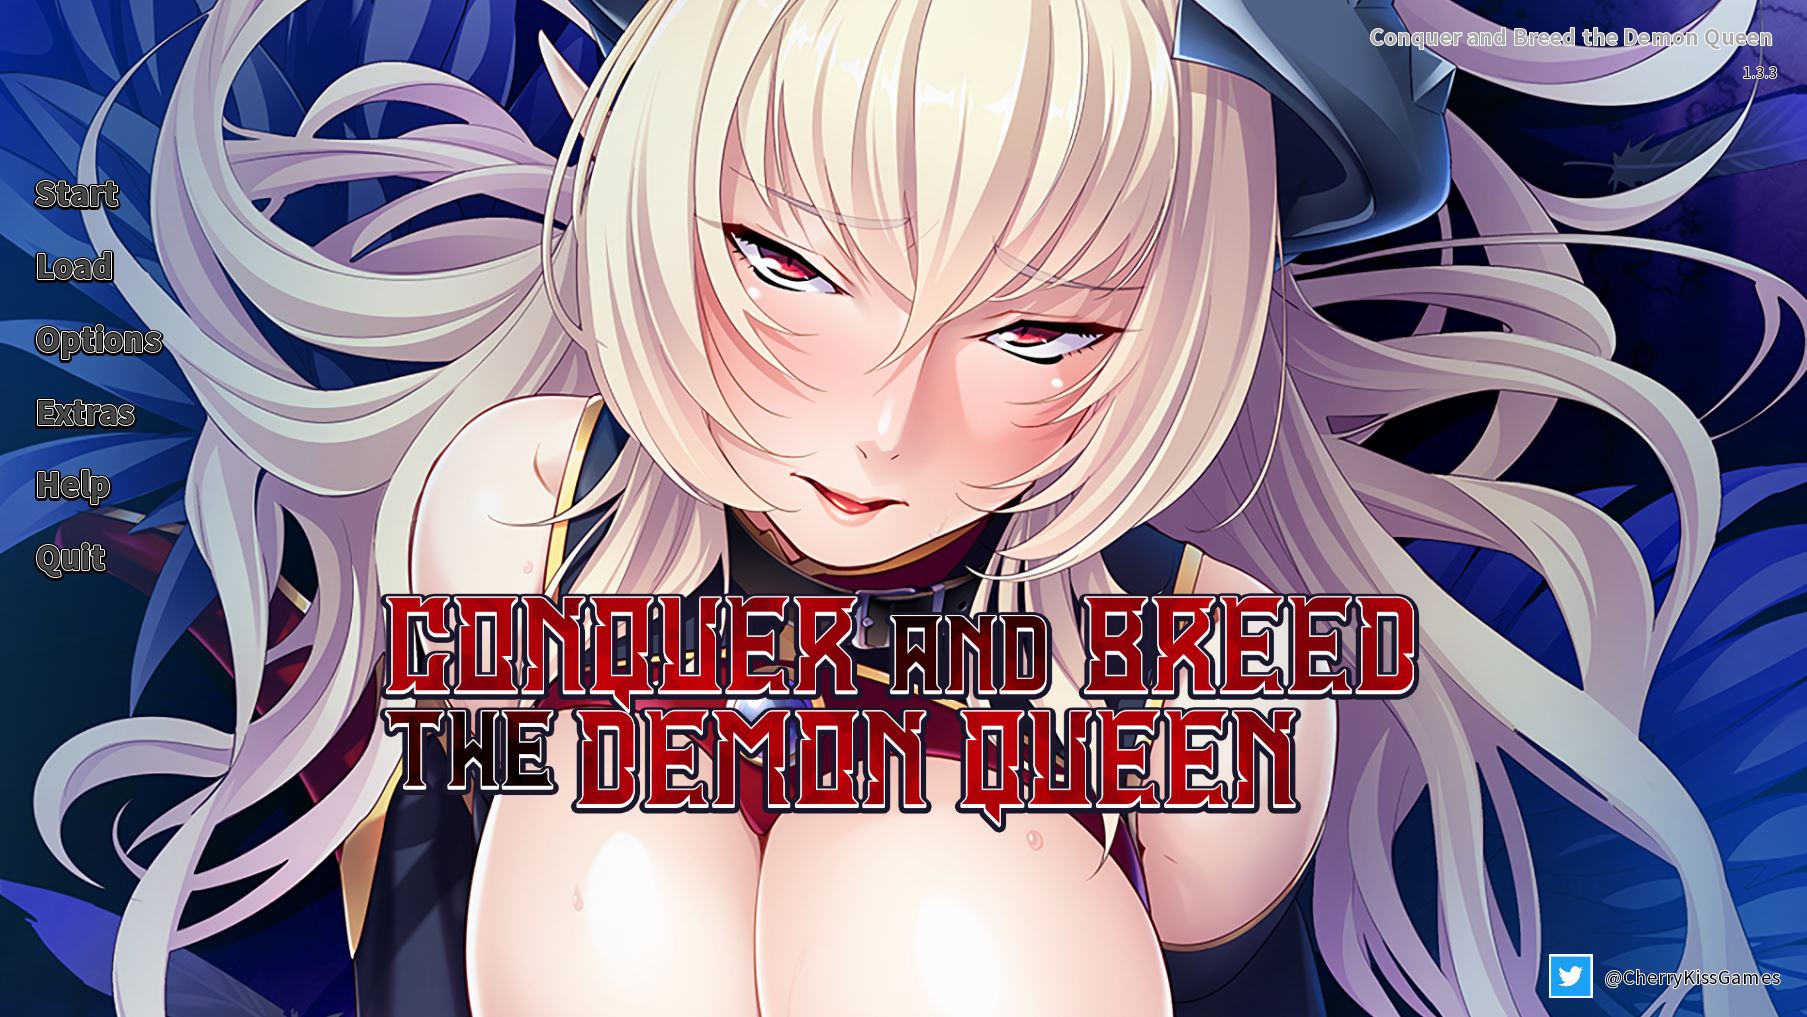 Sex Demon Queen Porn - Conquer and Breed the Demon Queen Ren'Py Porn Sex Game v.Final Download for  Windows, Linux